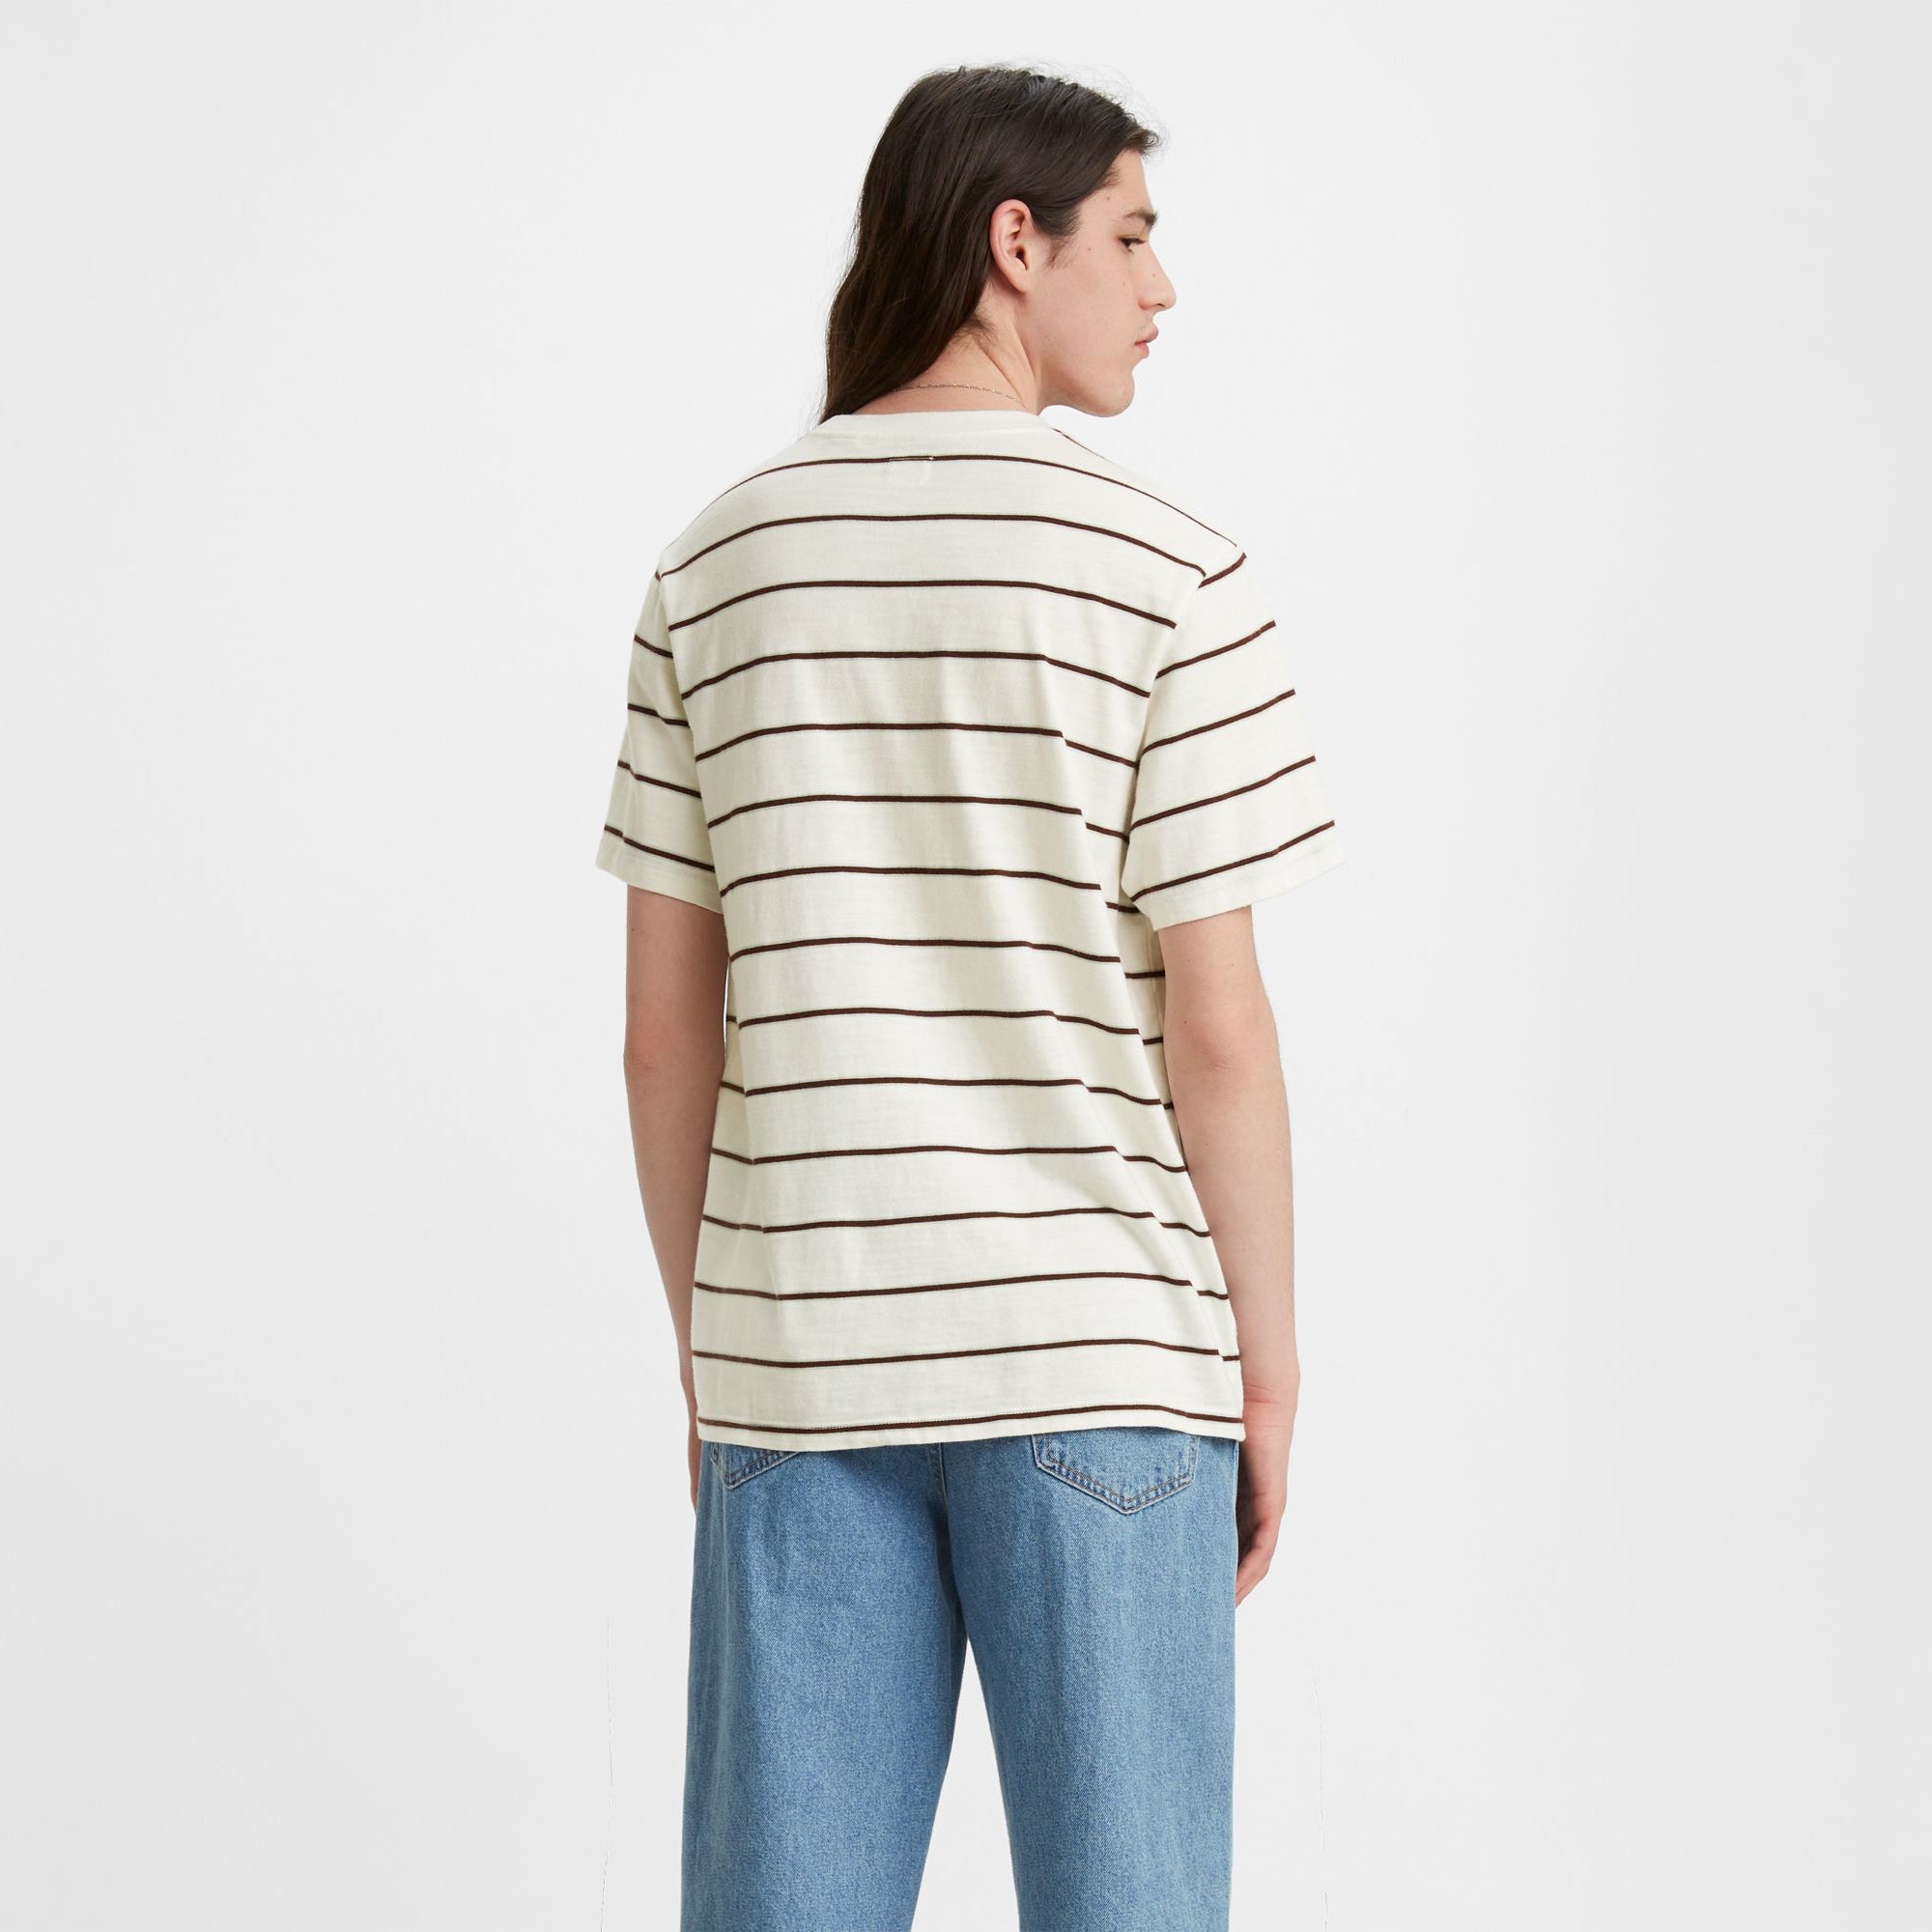 Off White Saturday Striped Levi's Relaxed Fit Pocket T-Shirt Back